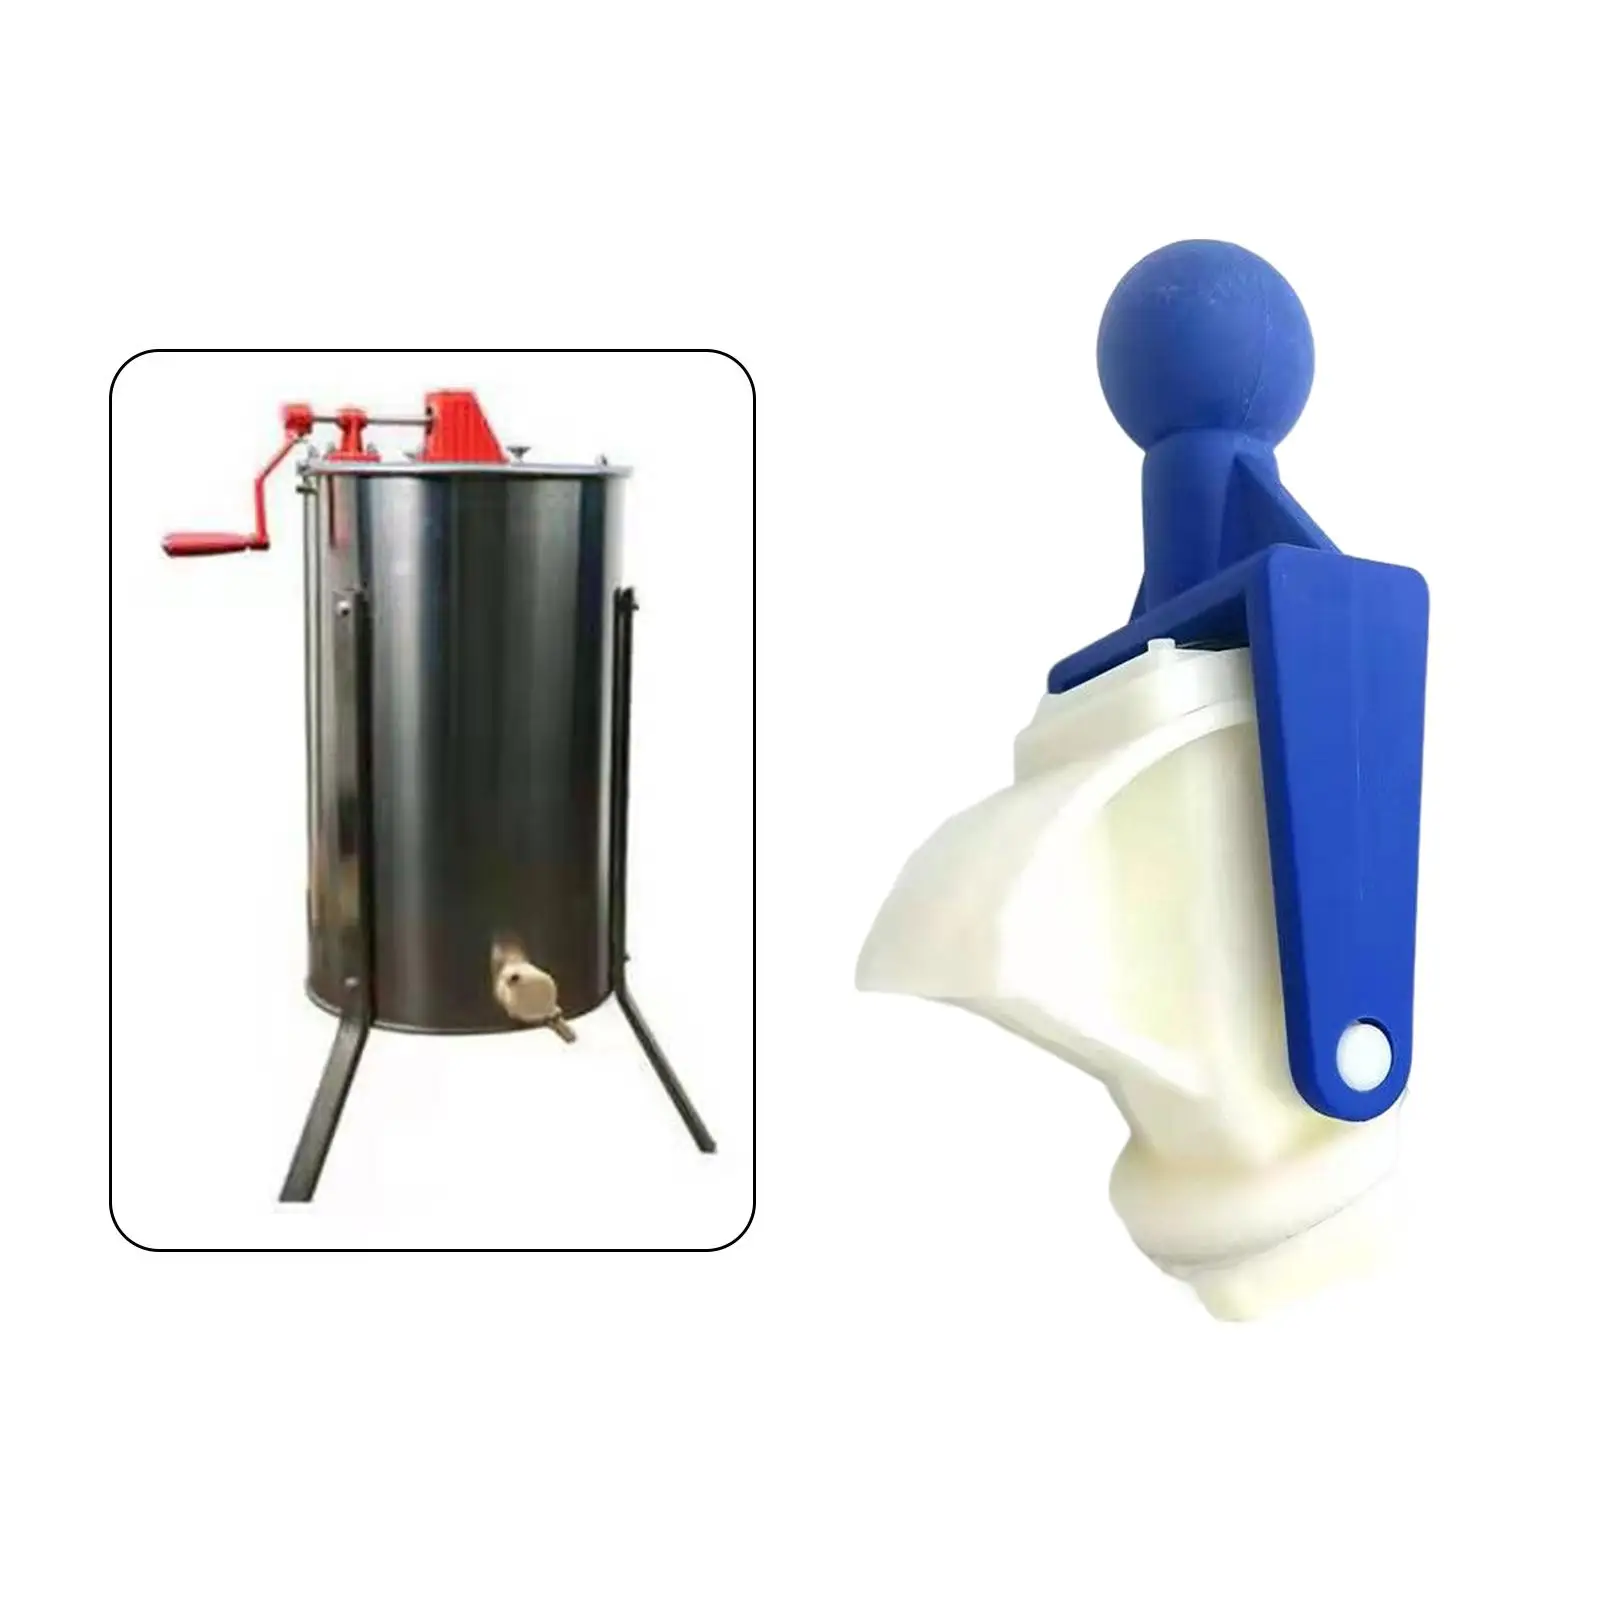 Push Type Honey Gate Extractor Tap Bee Bottling Equipment Gate for Beekeeping Tool Honey Machine Accessory Supplies